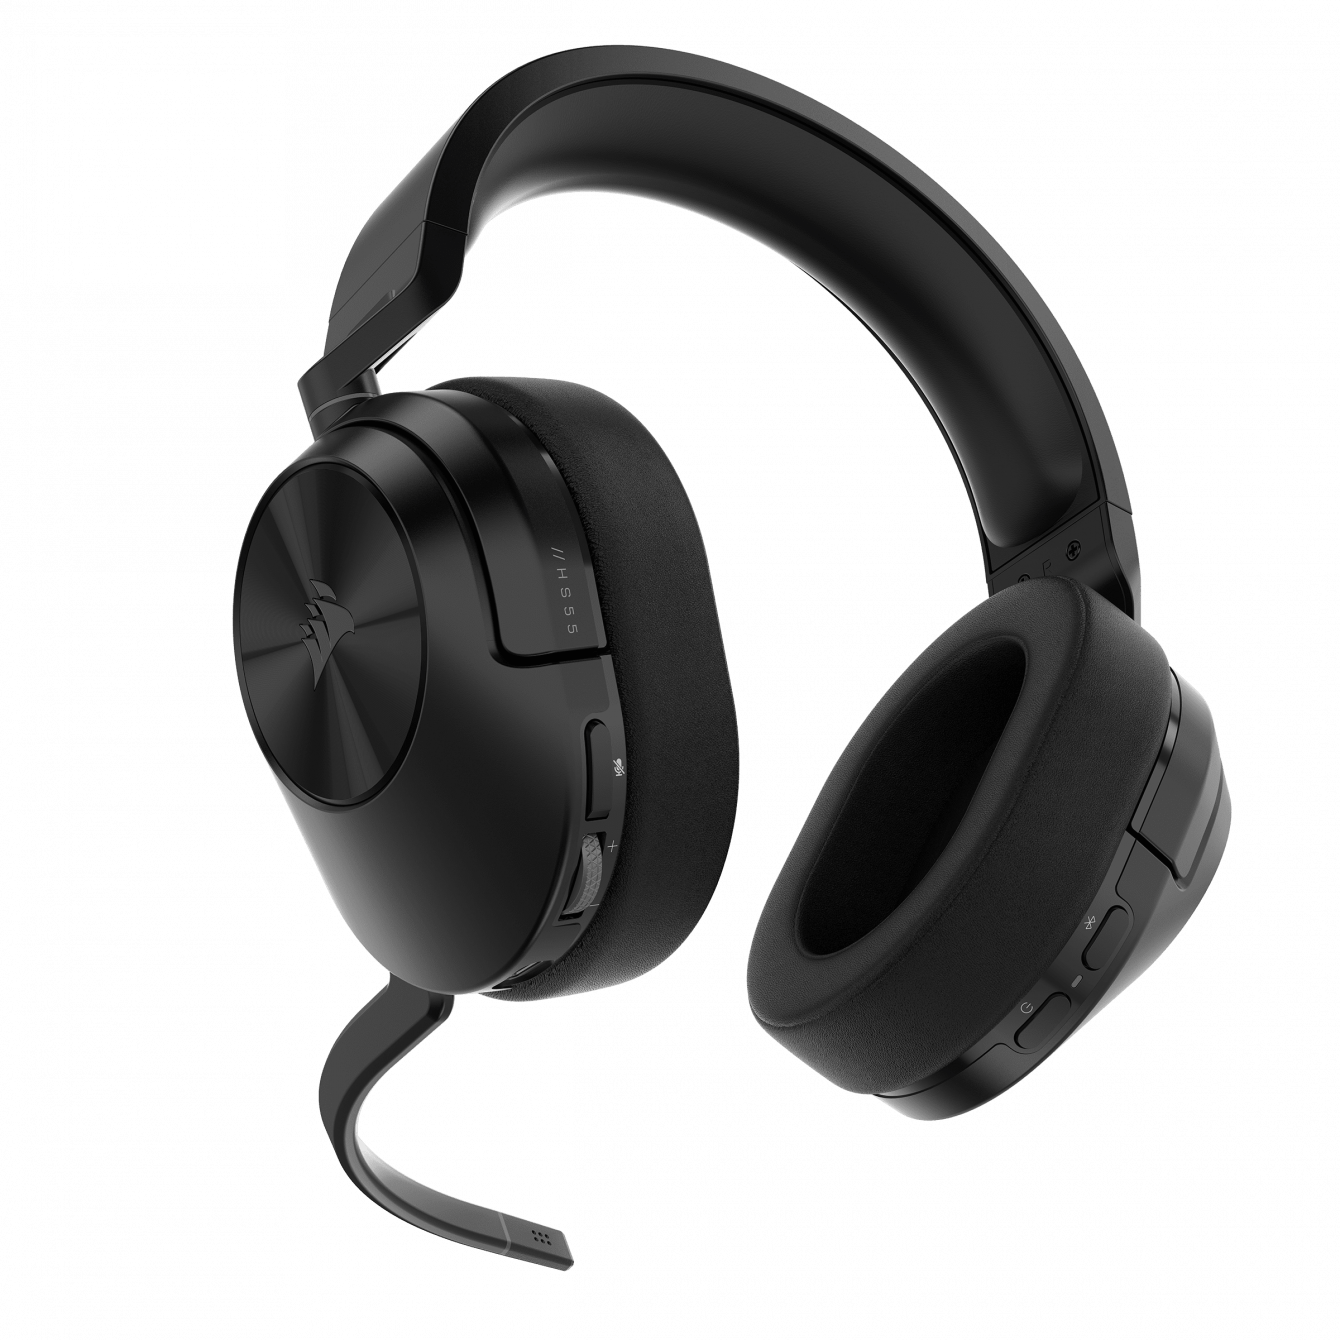 CORSAIR HS65 and HS55: two new models of gaming headsets